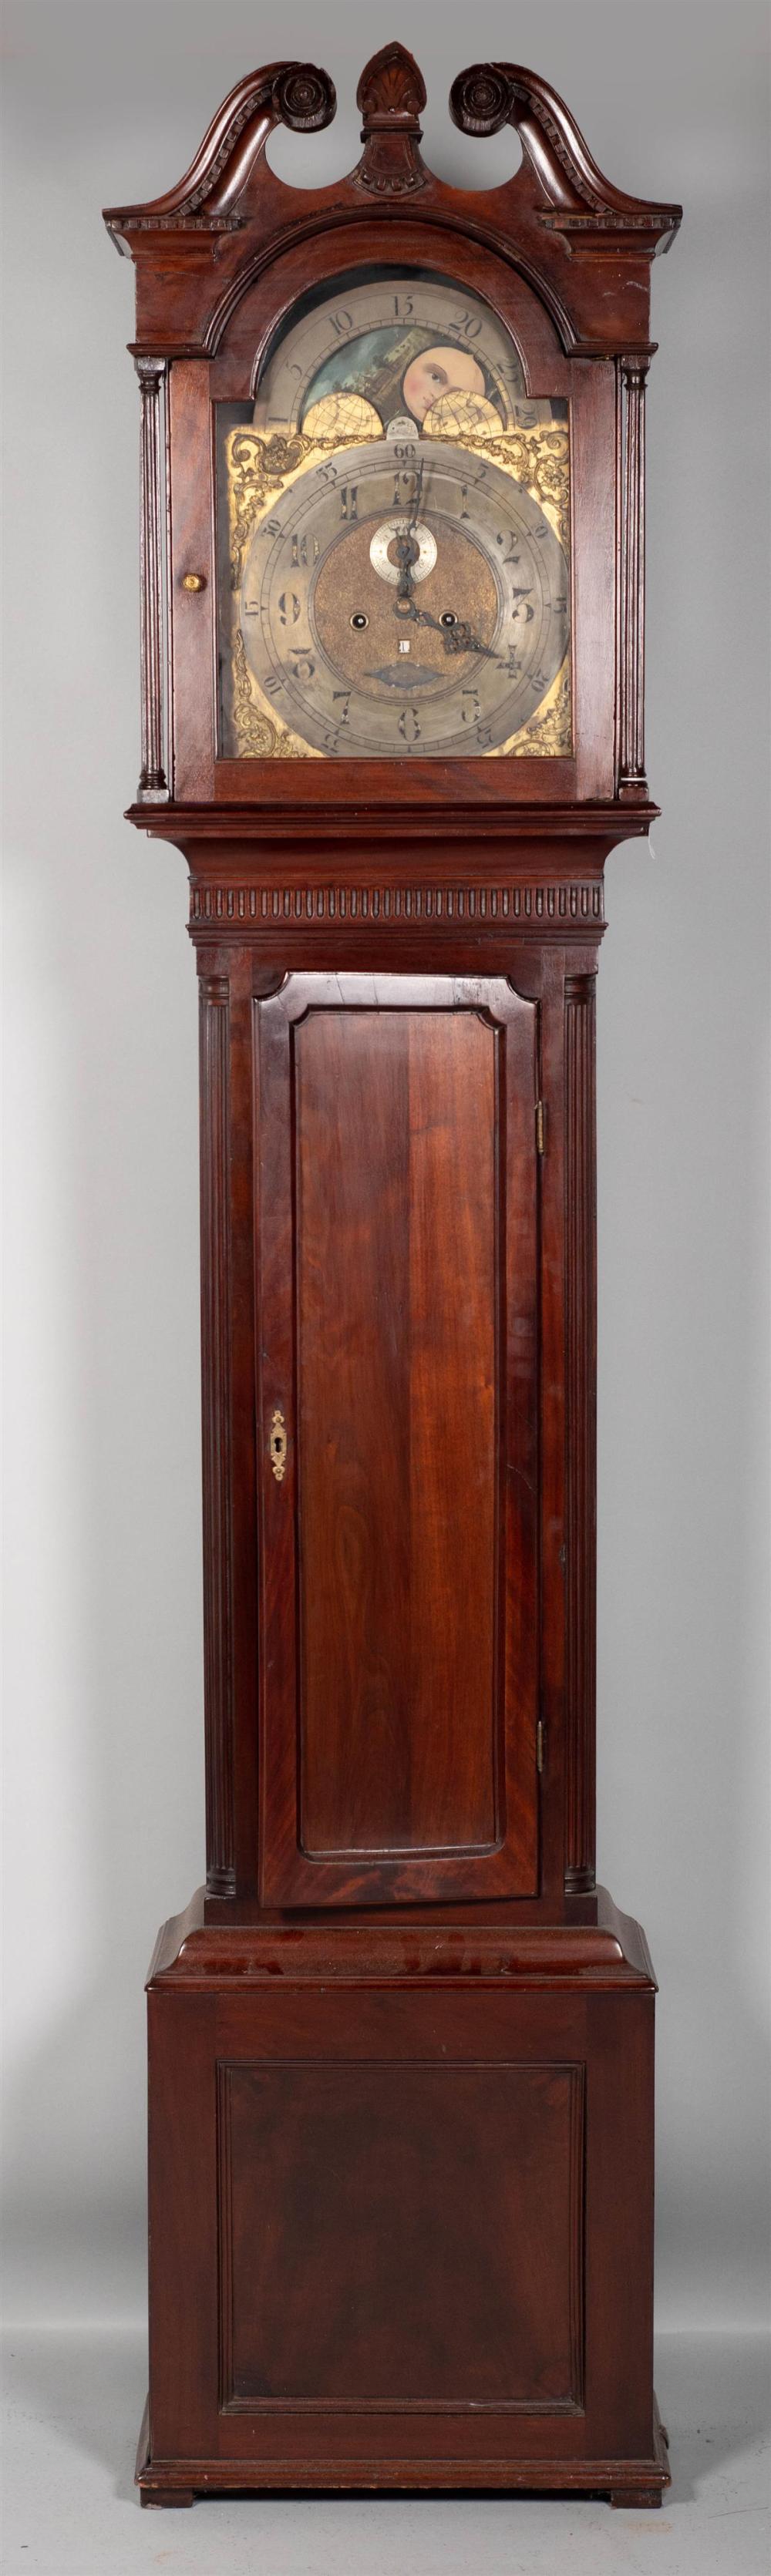 CHIPPENDALE STYLE MAHOGANY TALL